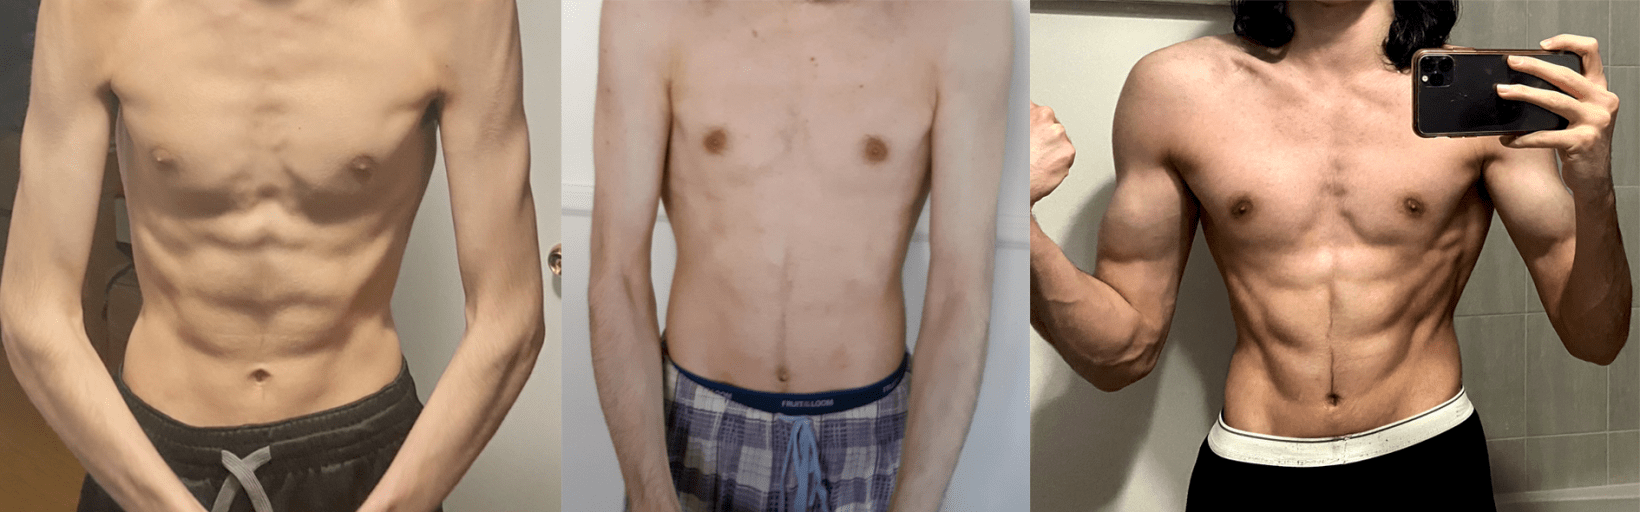 A photo of a 6'2" man showing a muscle gain from 124 pounds to 146 pounds. A respectable gain of 22 pounds.